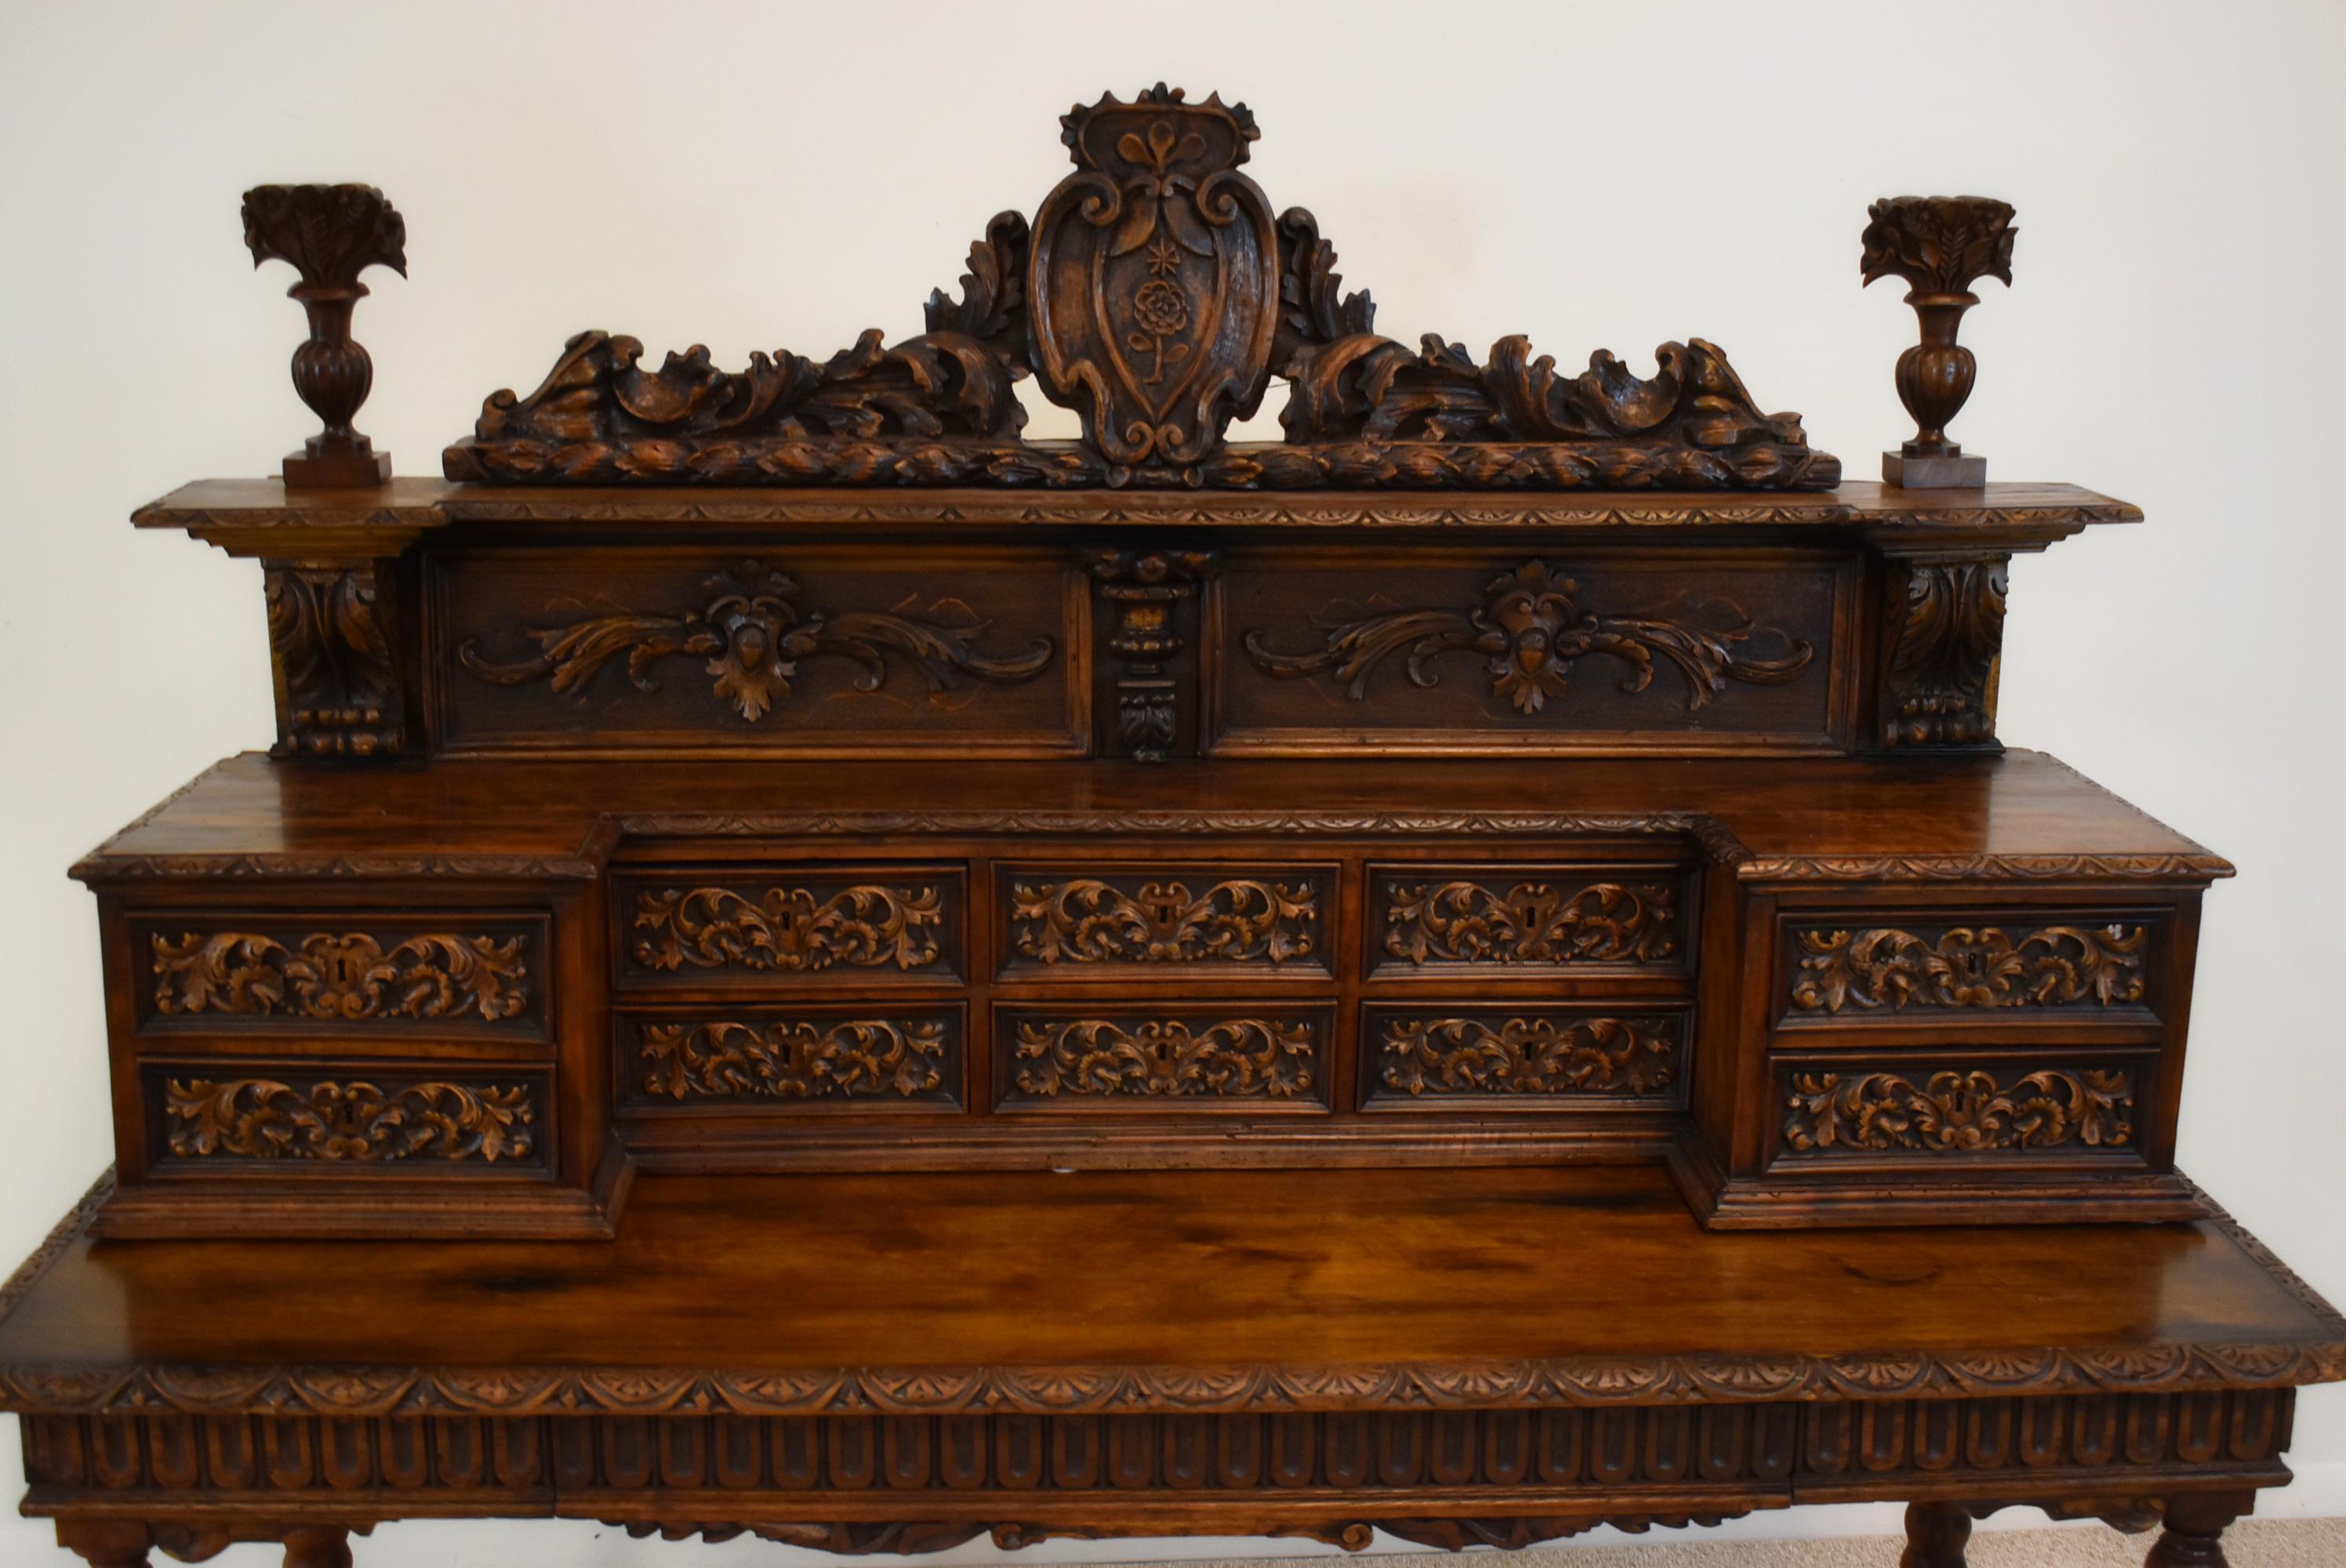 A late 19th century French two part writing desk. Oak construction with extensive hand carved detail, features a wall hanging upper section with scrolled crest and foliate detail above an open shelf and two tiers of five small drawers, separate base